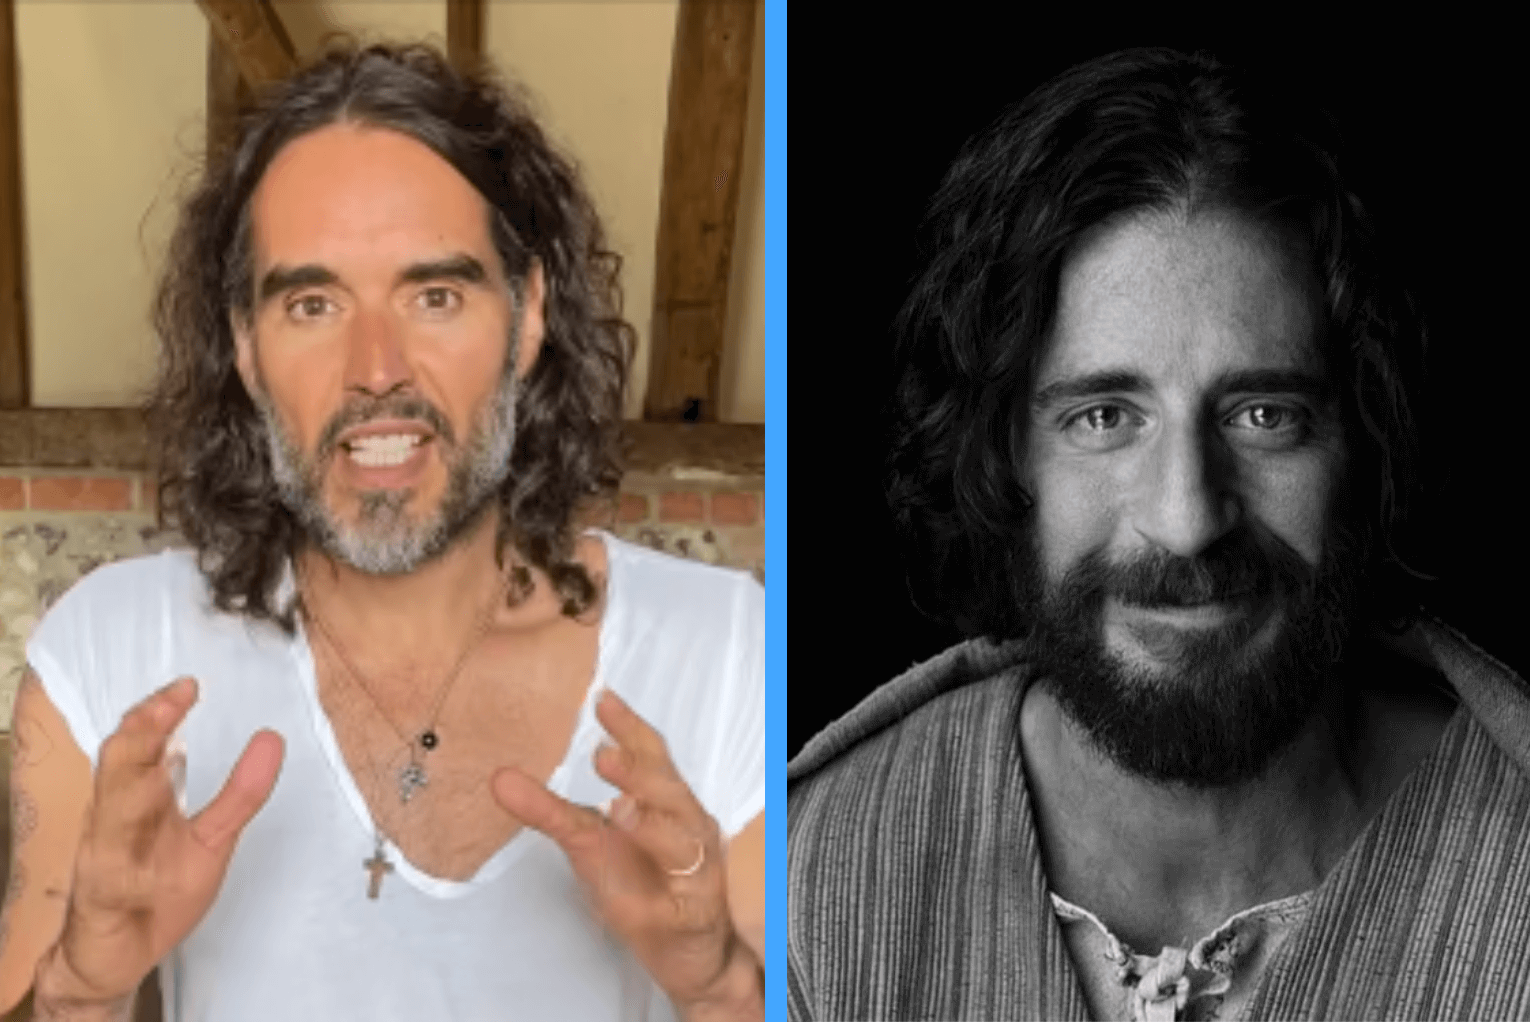 Russell Brand Connects With ‘The Chosen’ Star in Search of Christian Friends